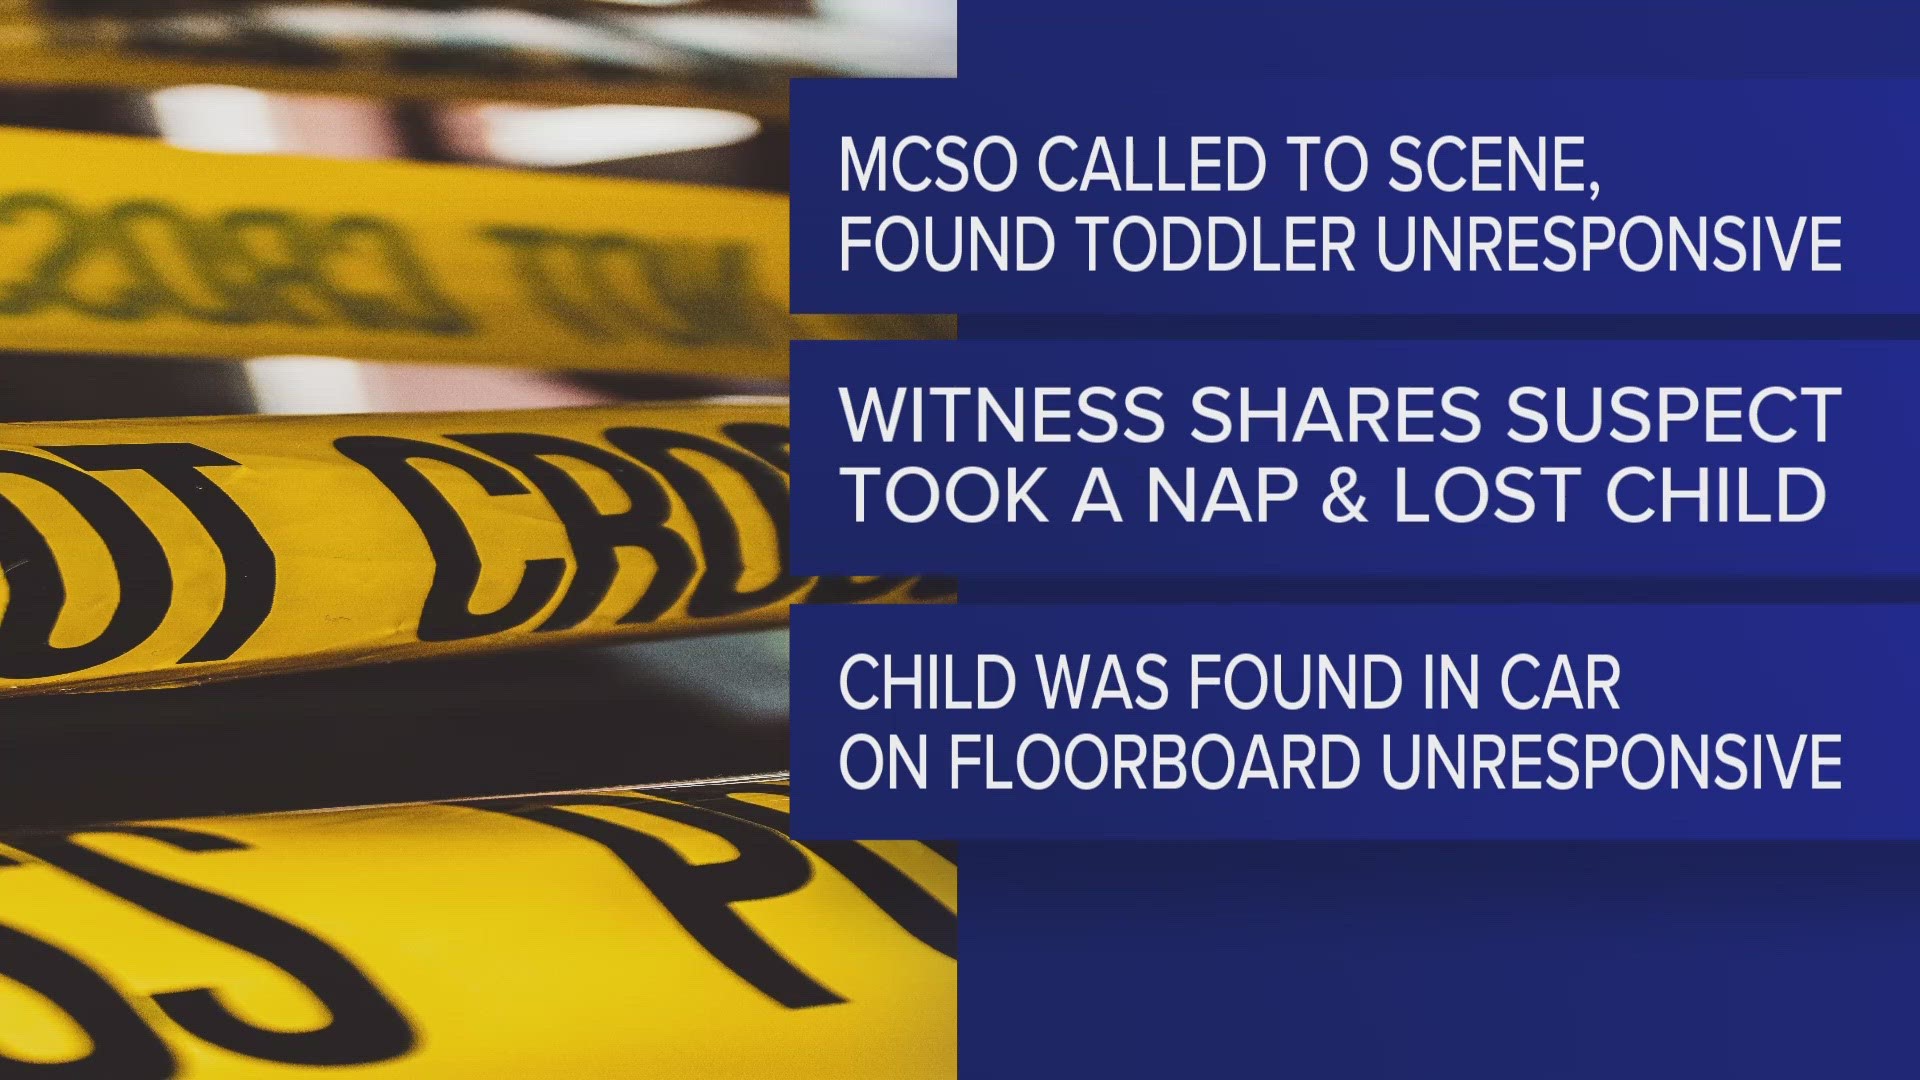 According to the Medical Examiner's report, the cause of death for the child was hyperthermia and the manner of the death was an accident.